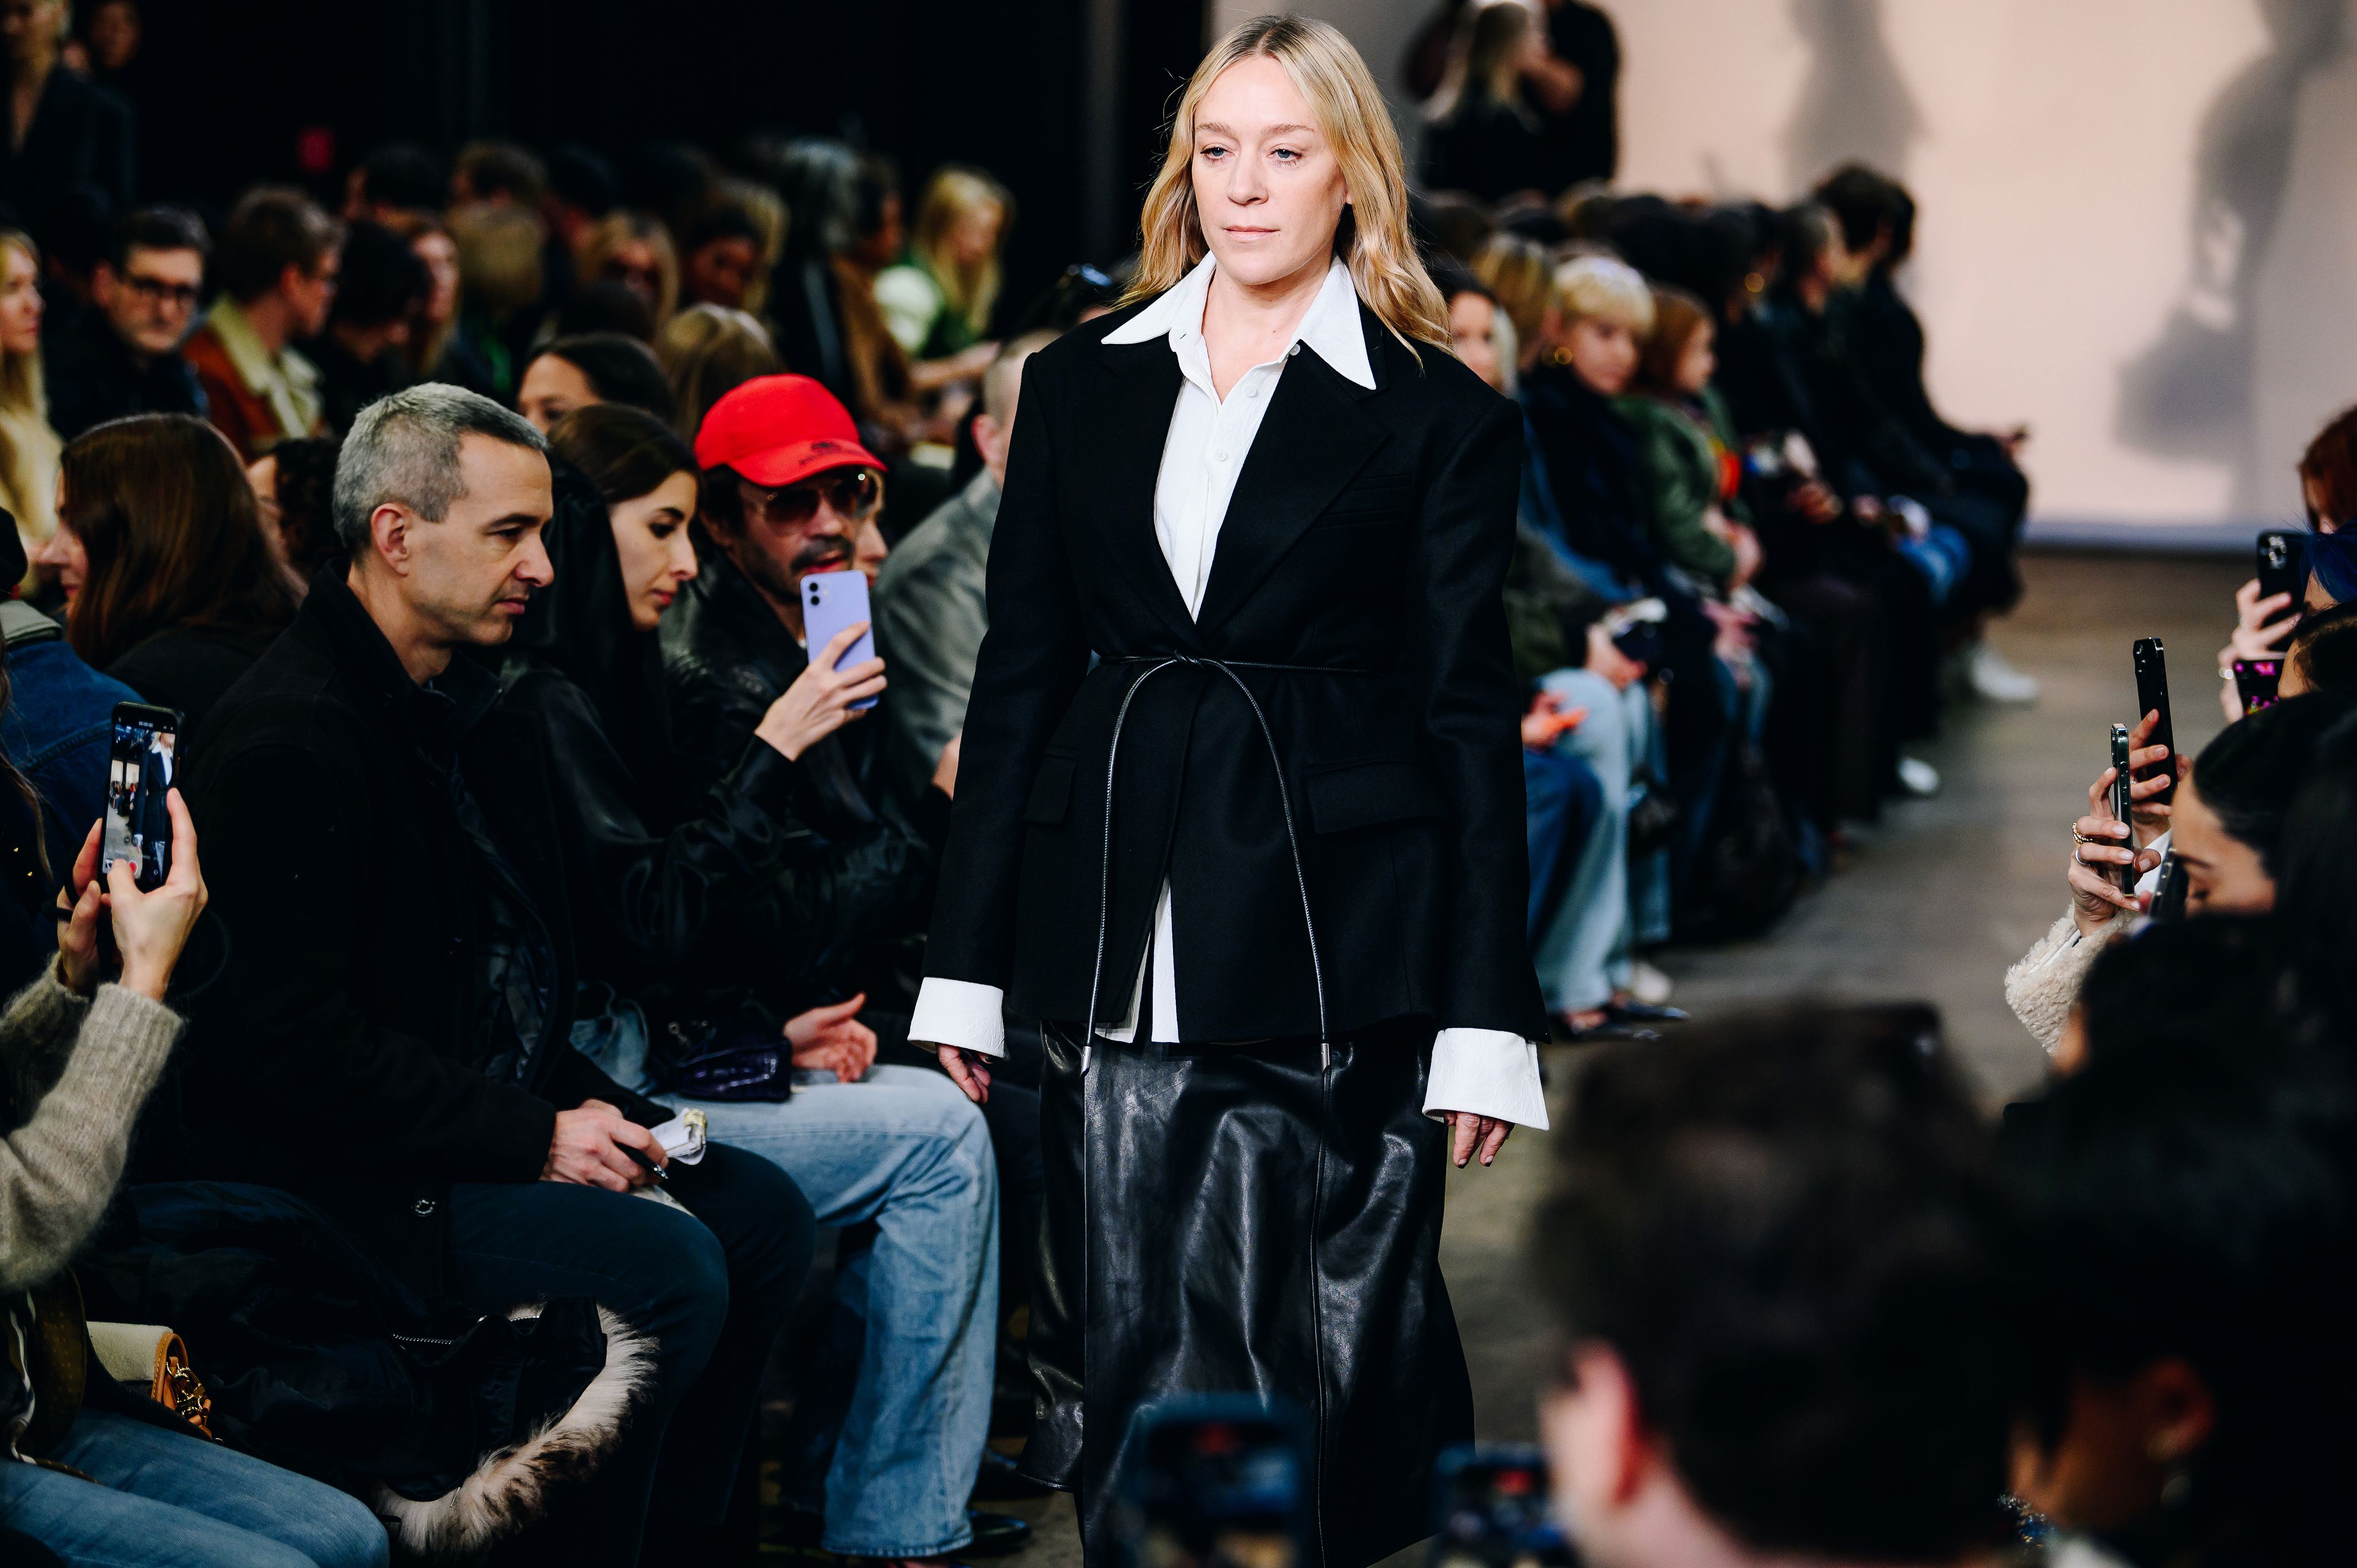 Helmut Lang Fall 2022 Ready-to-Wear Collection